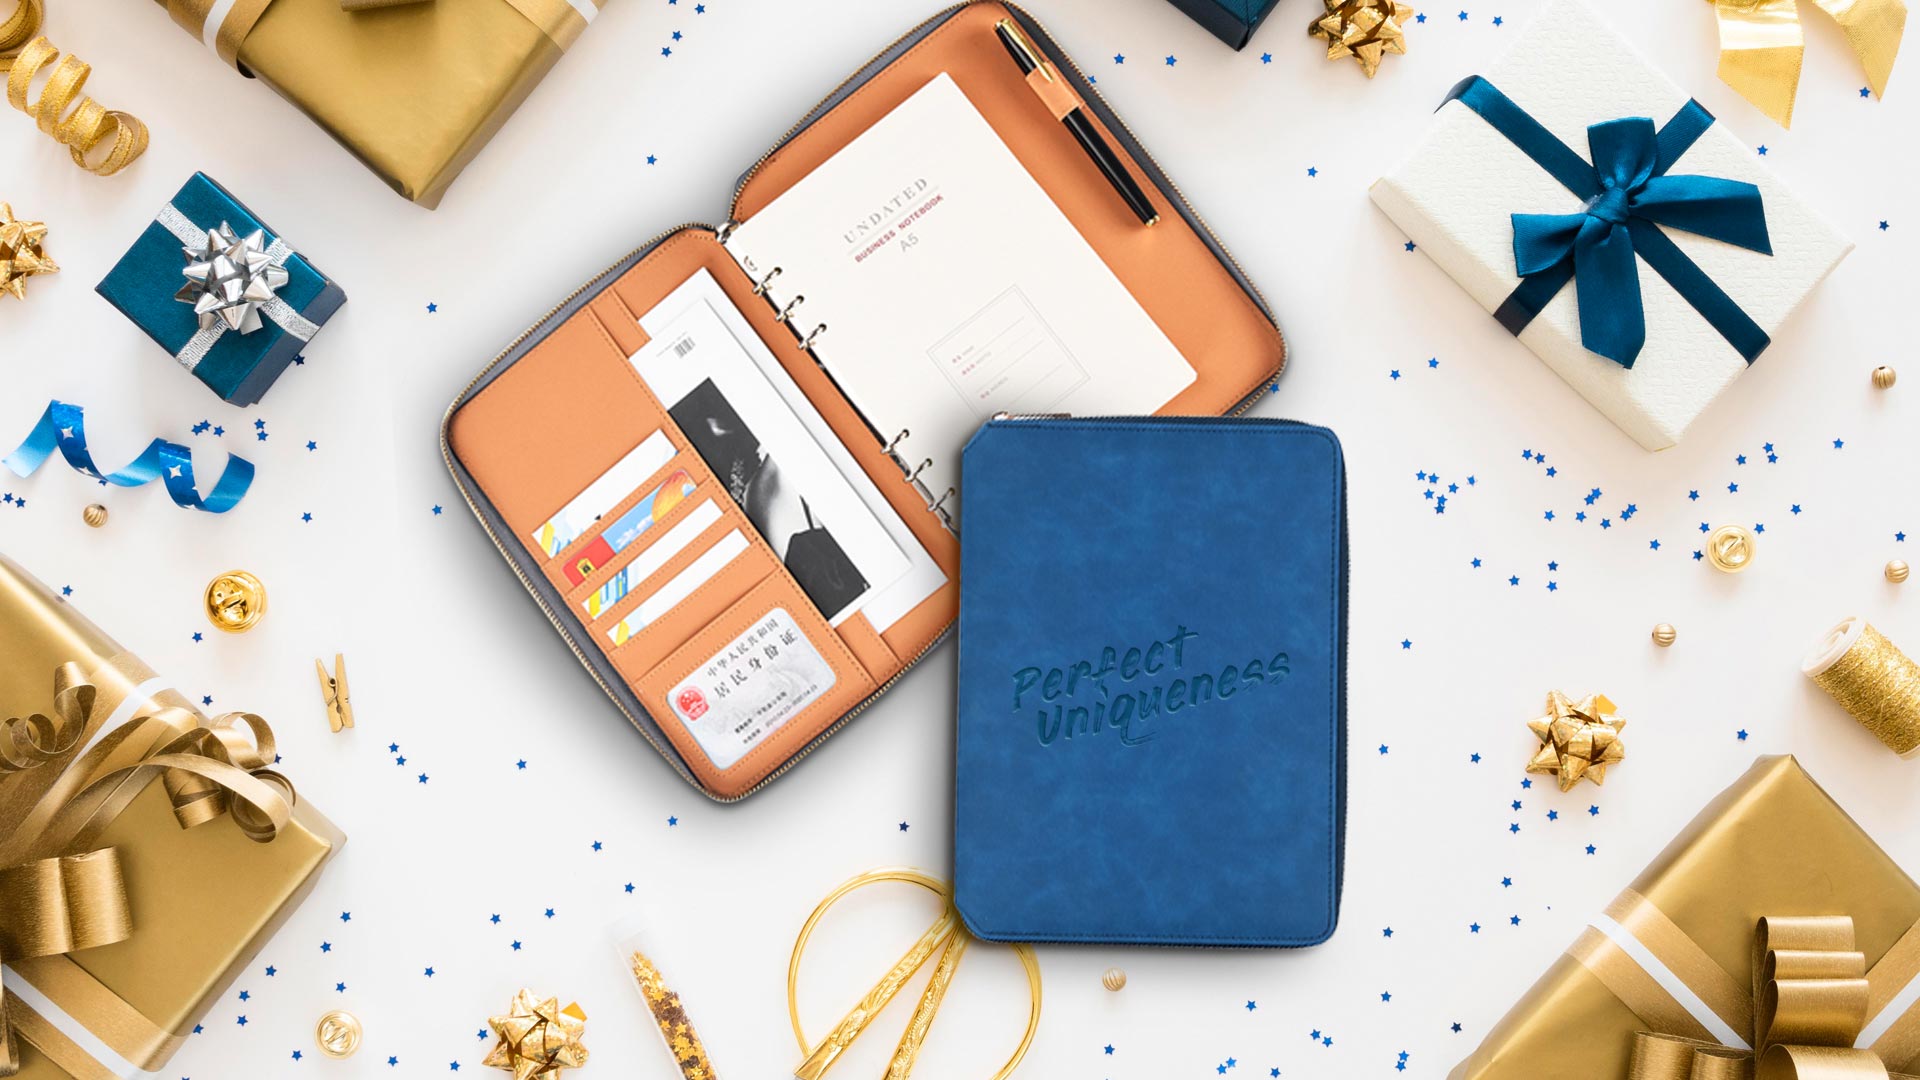 12 Unique End of Year Corporate Gifts That Say the Perfect “Thank You